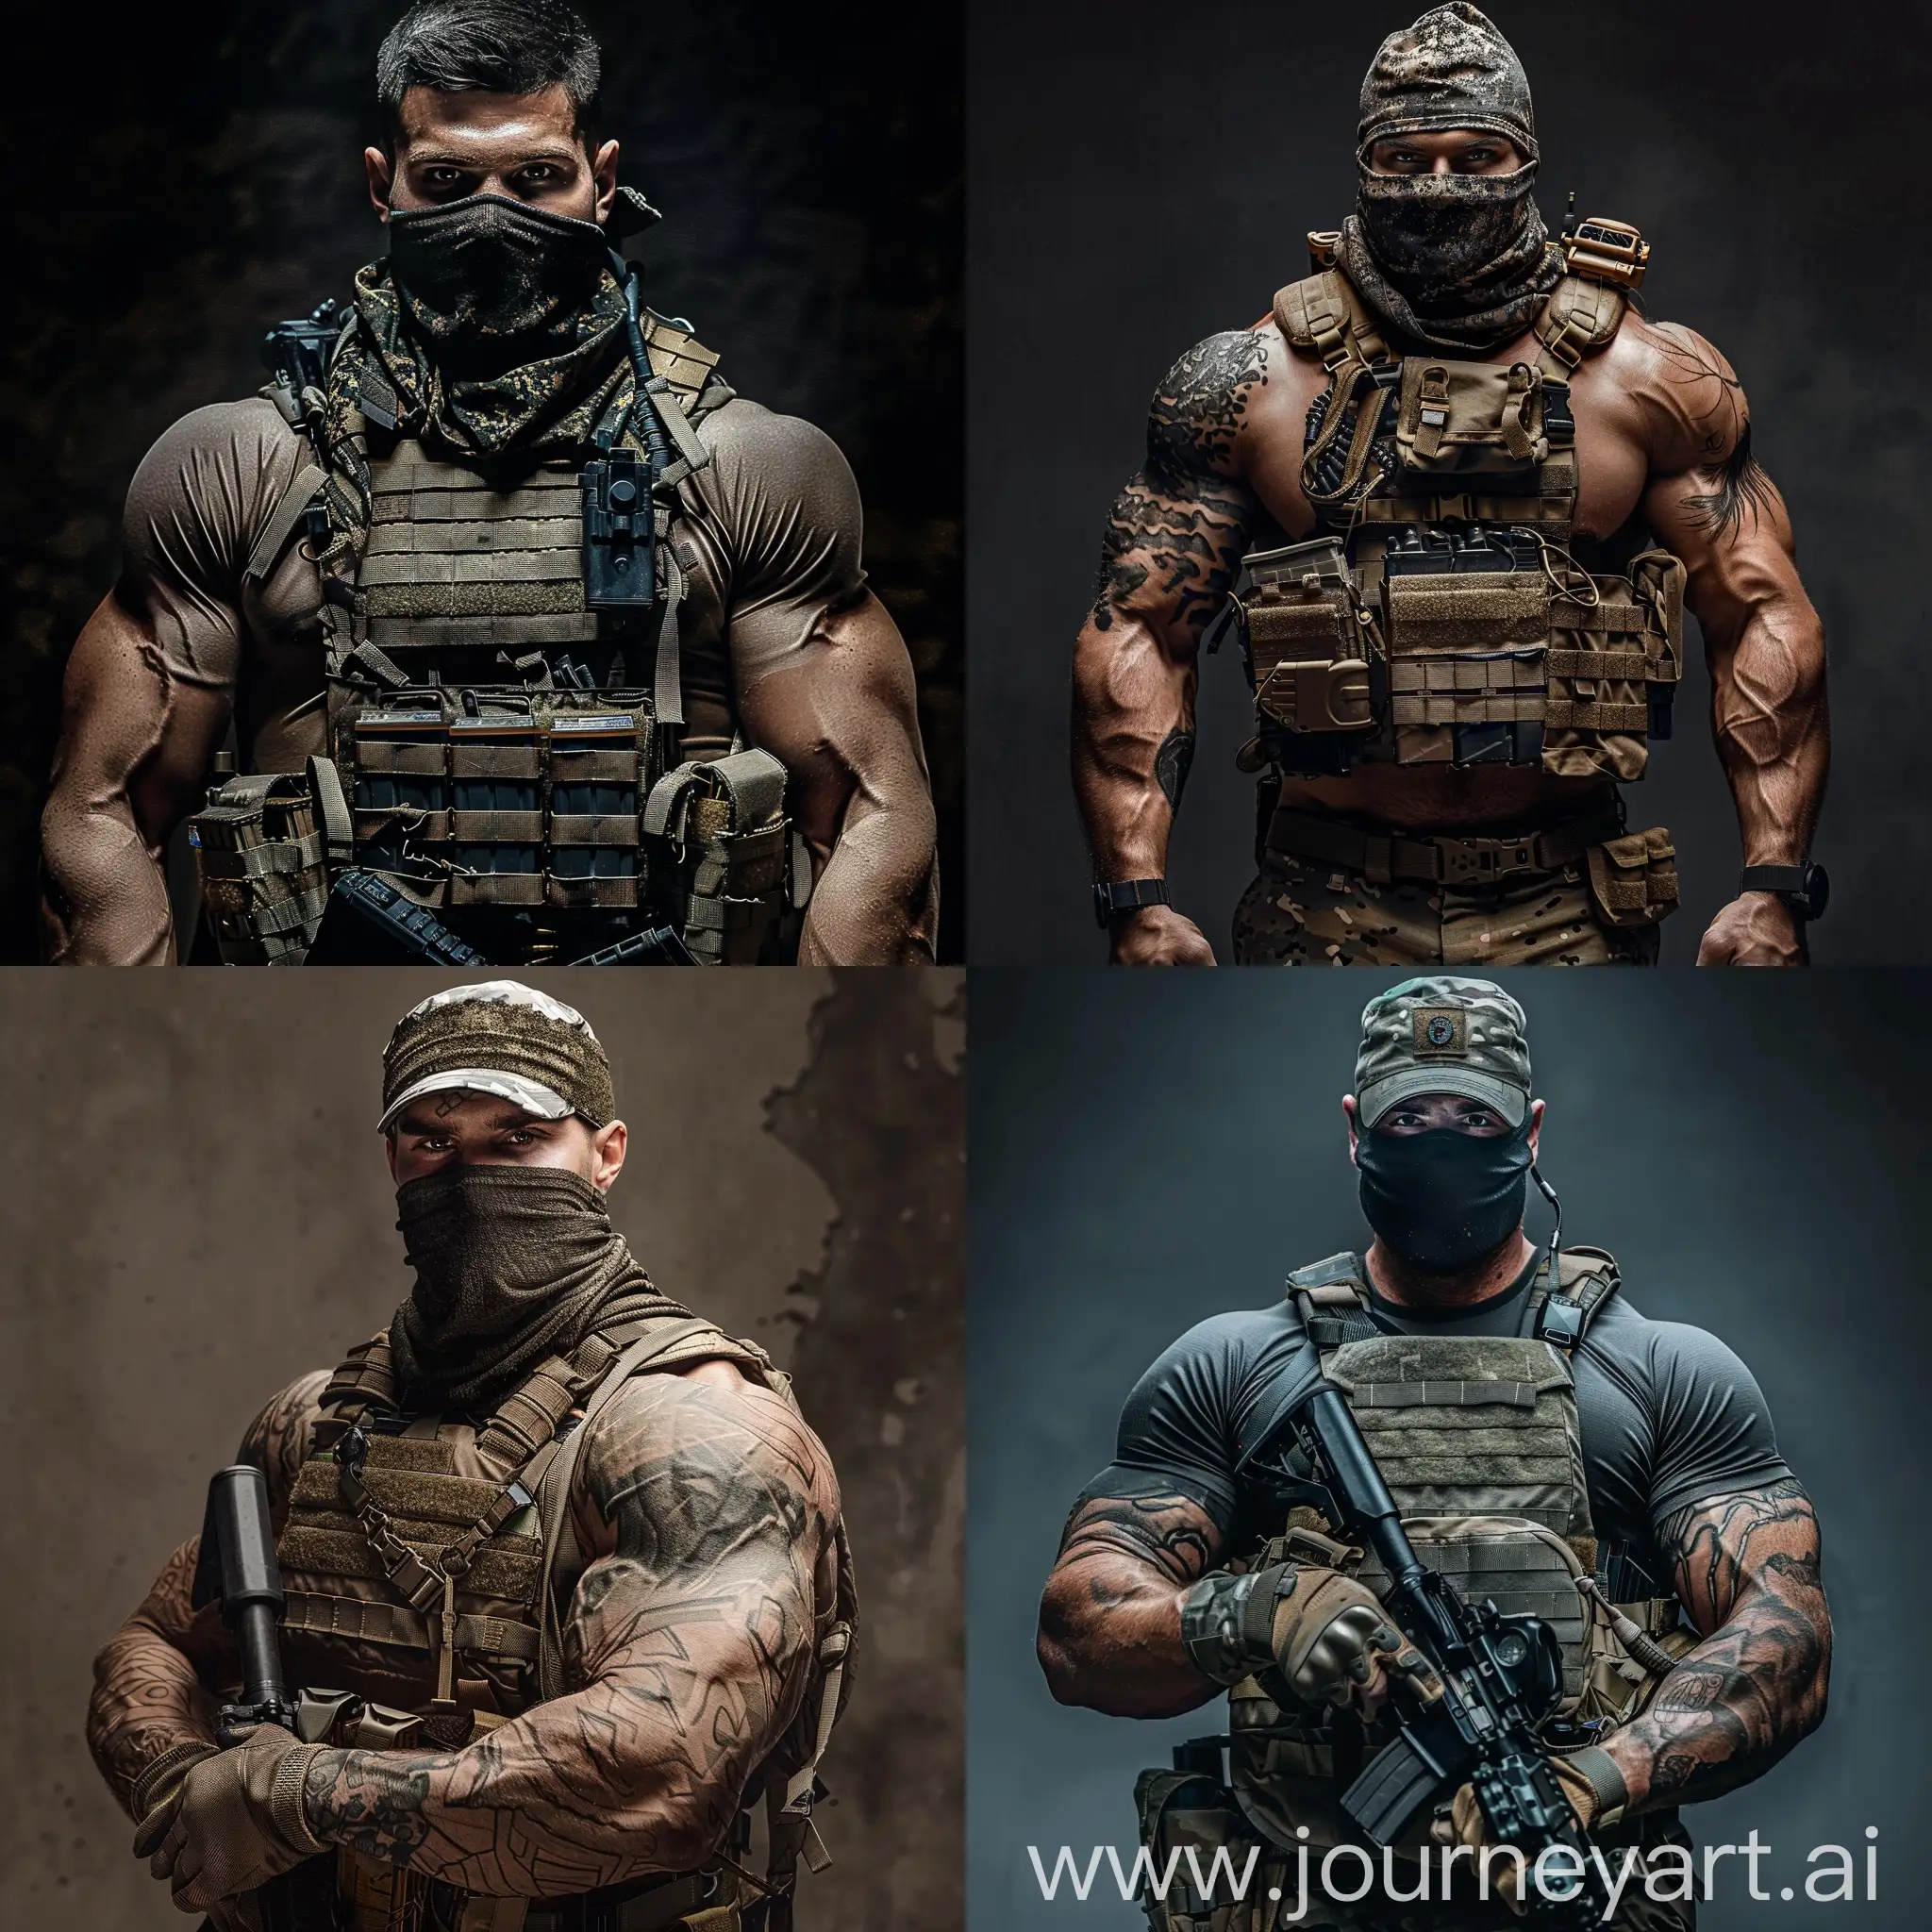 Tactical-Soldier-in-Full-Gear-with-Covered-Face